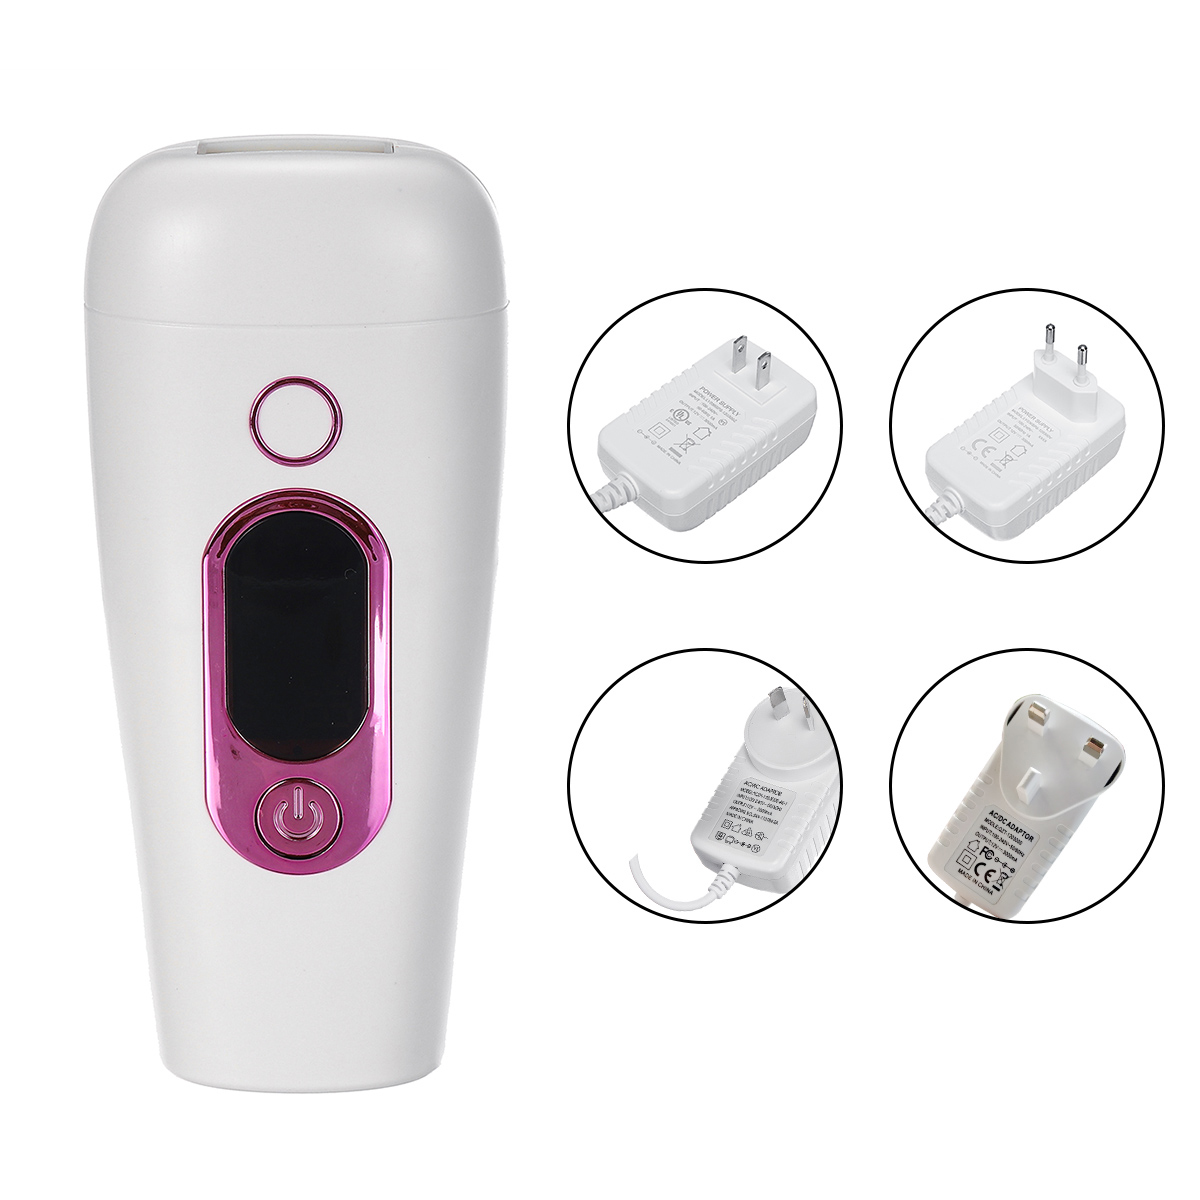 

999,999 Flashes 2 in 1 Laser IPL Permanent Hair Removal Machine Body Skin Painless Hair Remover Epilator